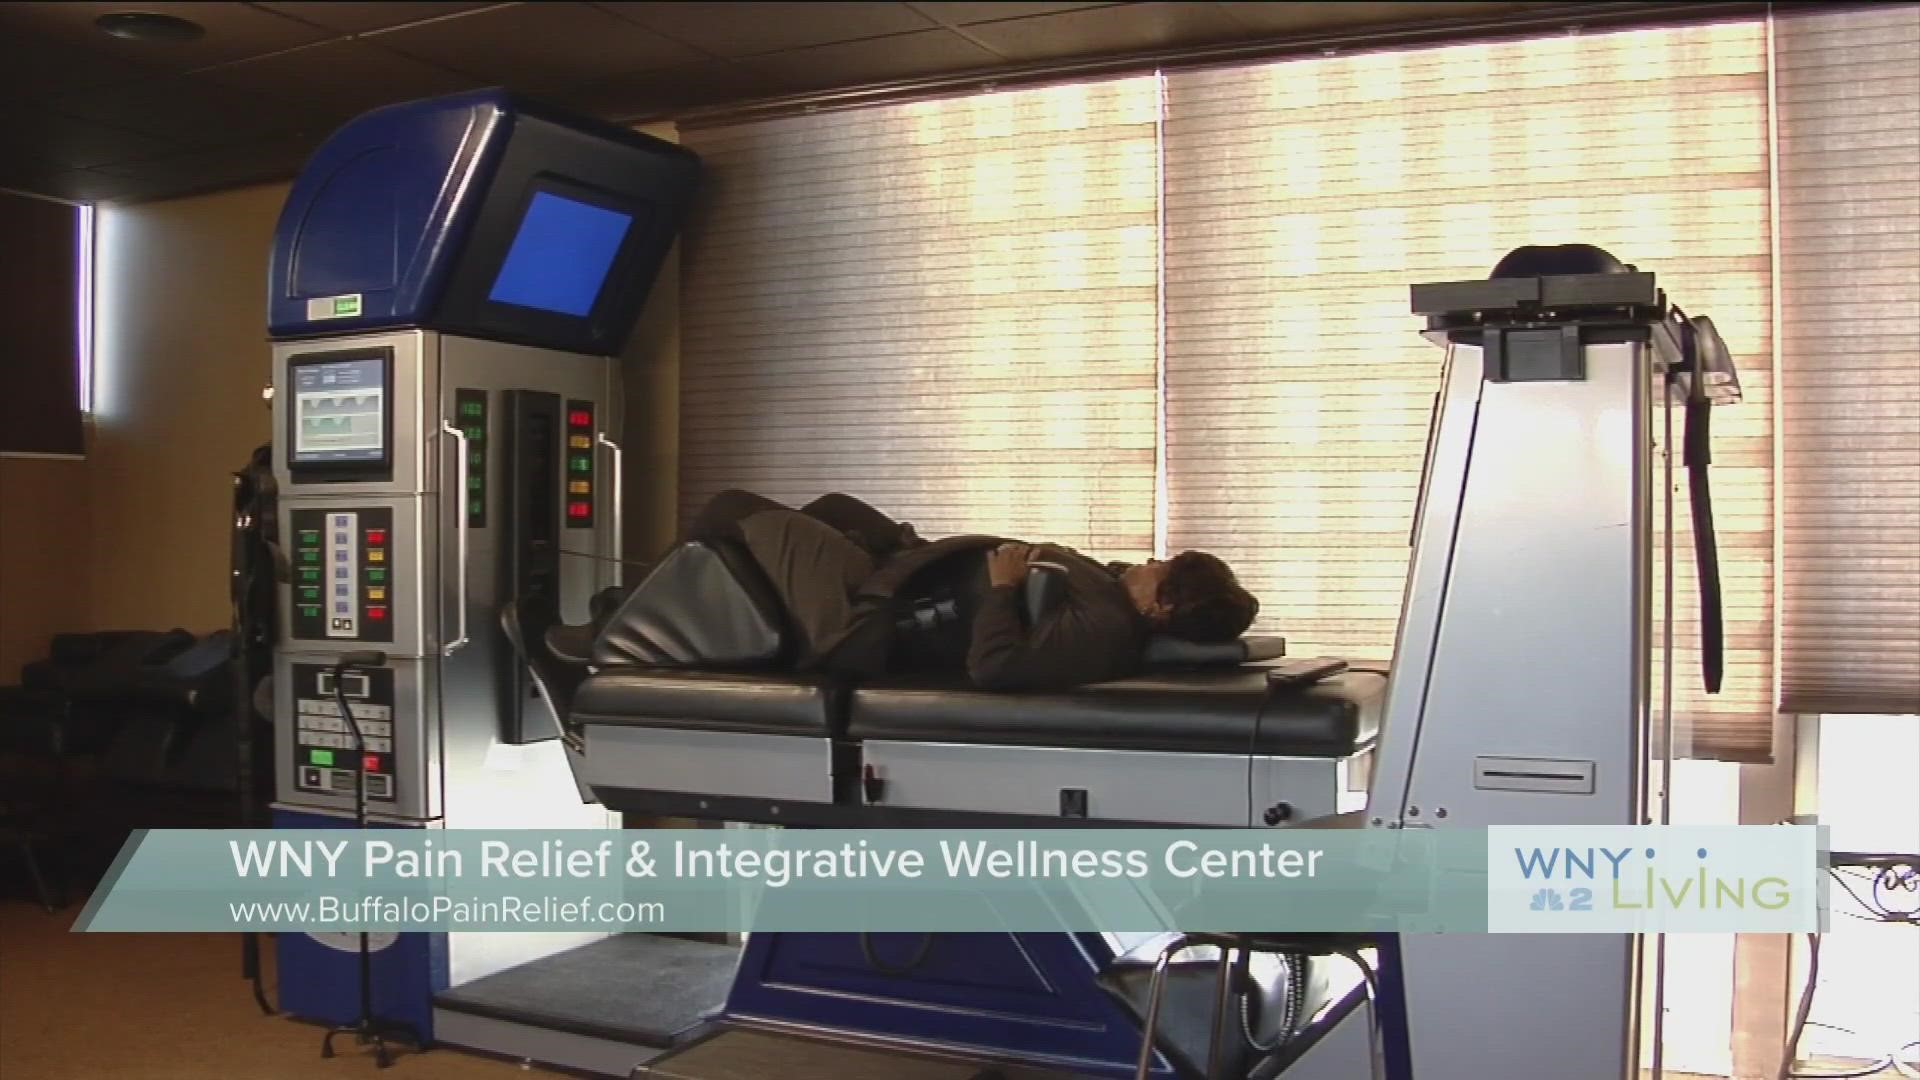 March 4- WNY Pain Relief & Integrative Wellness Center (THIS VIDEO IS SPONSORED BY WNY PAIN RELEIF & INTEGRATIVE WELLNESS CENTER)